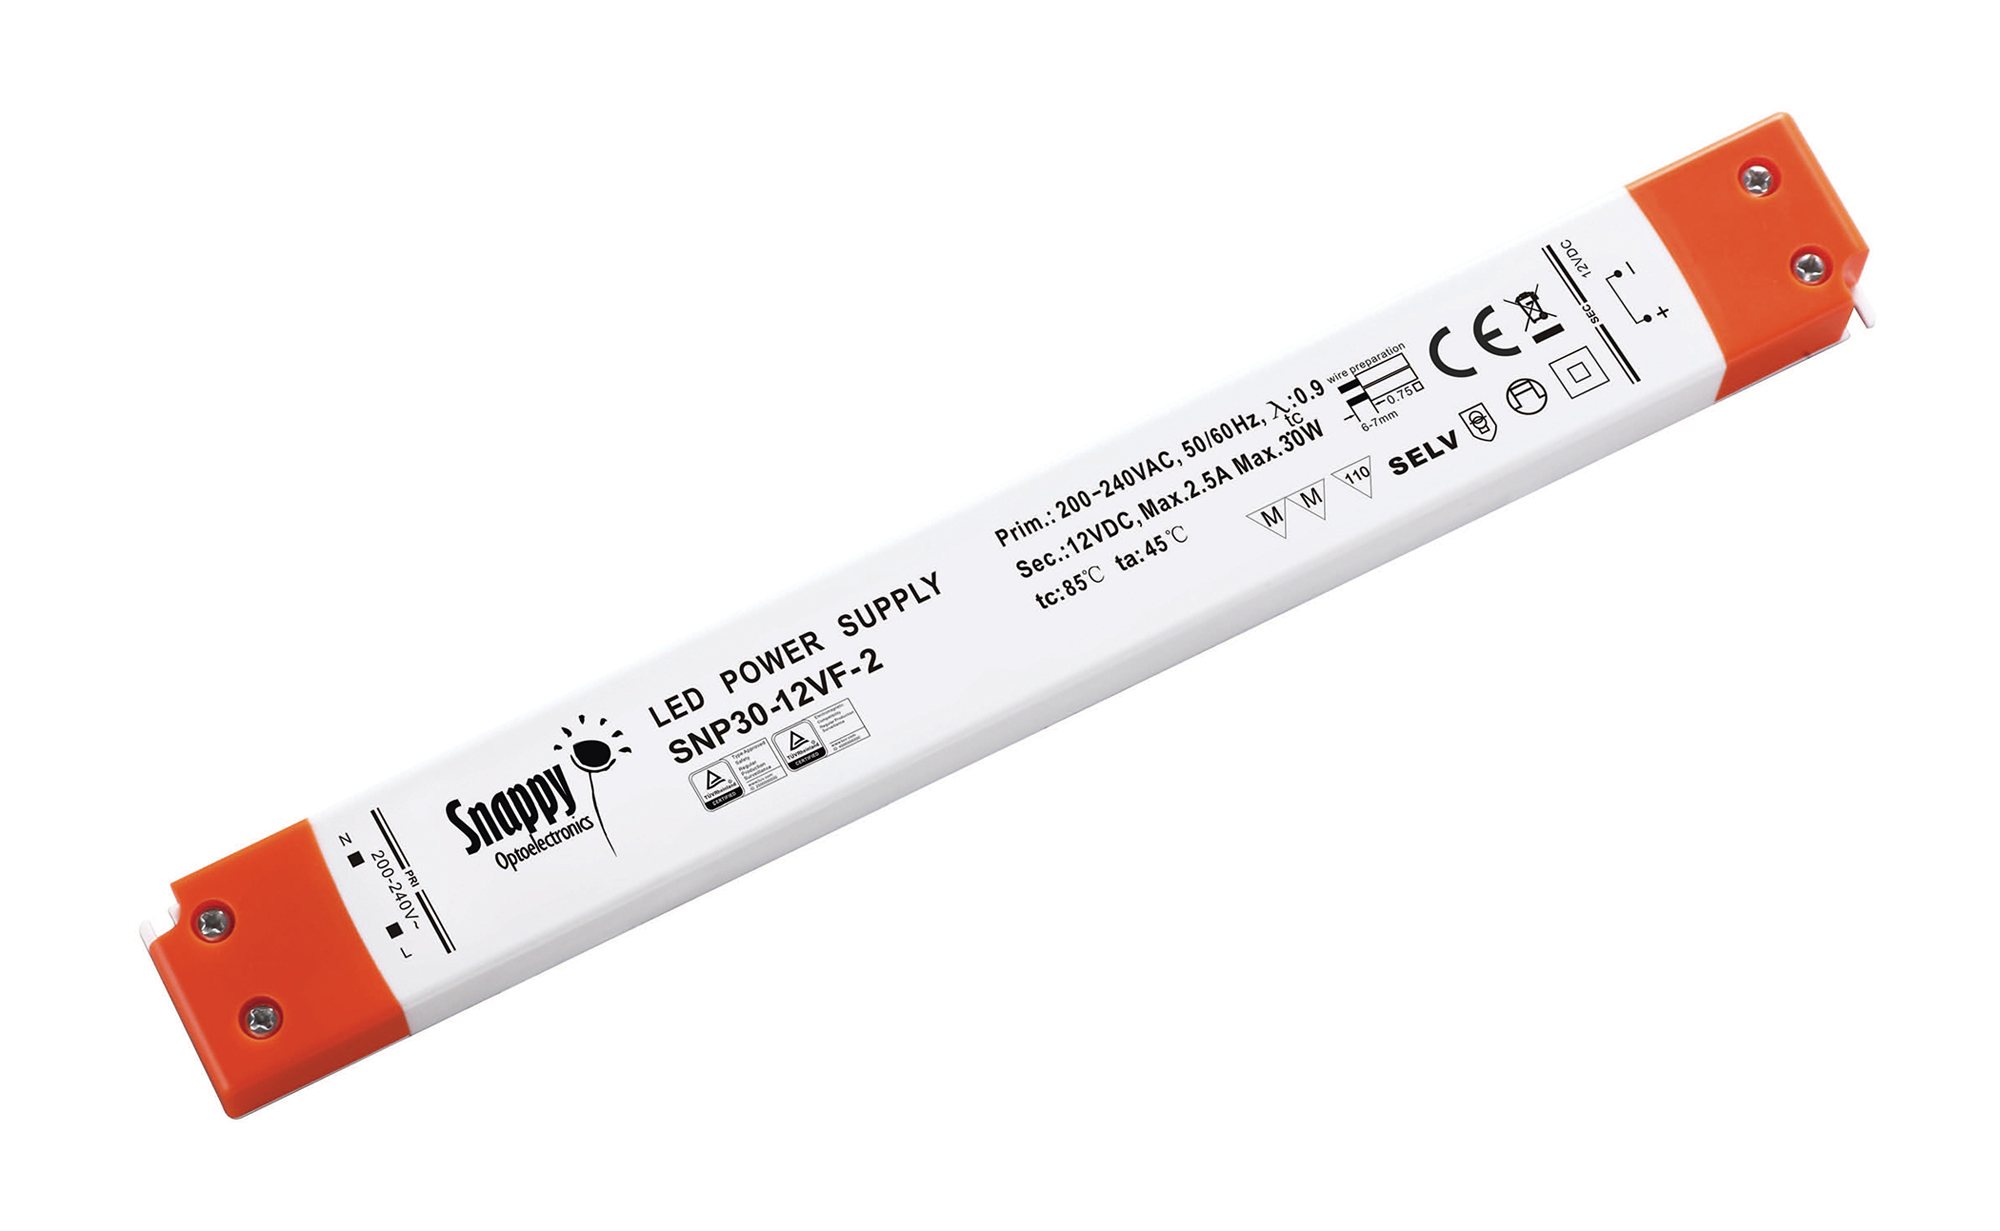 SNP30-12VF-2  30W Constant Voltage Non-Dimmable LED Driver 12VDC 2.5A IP20